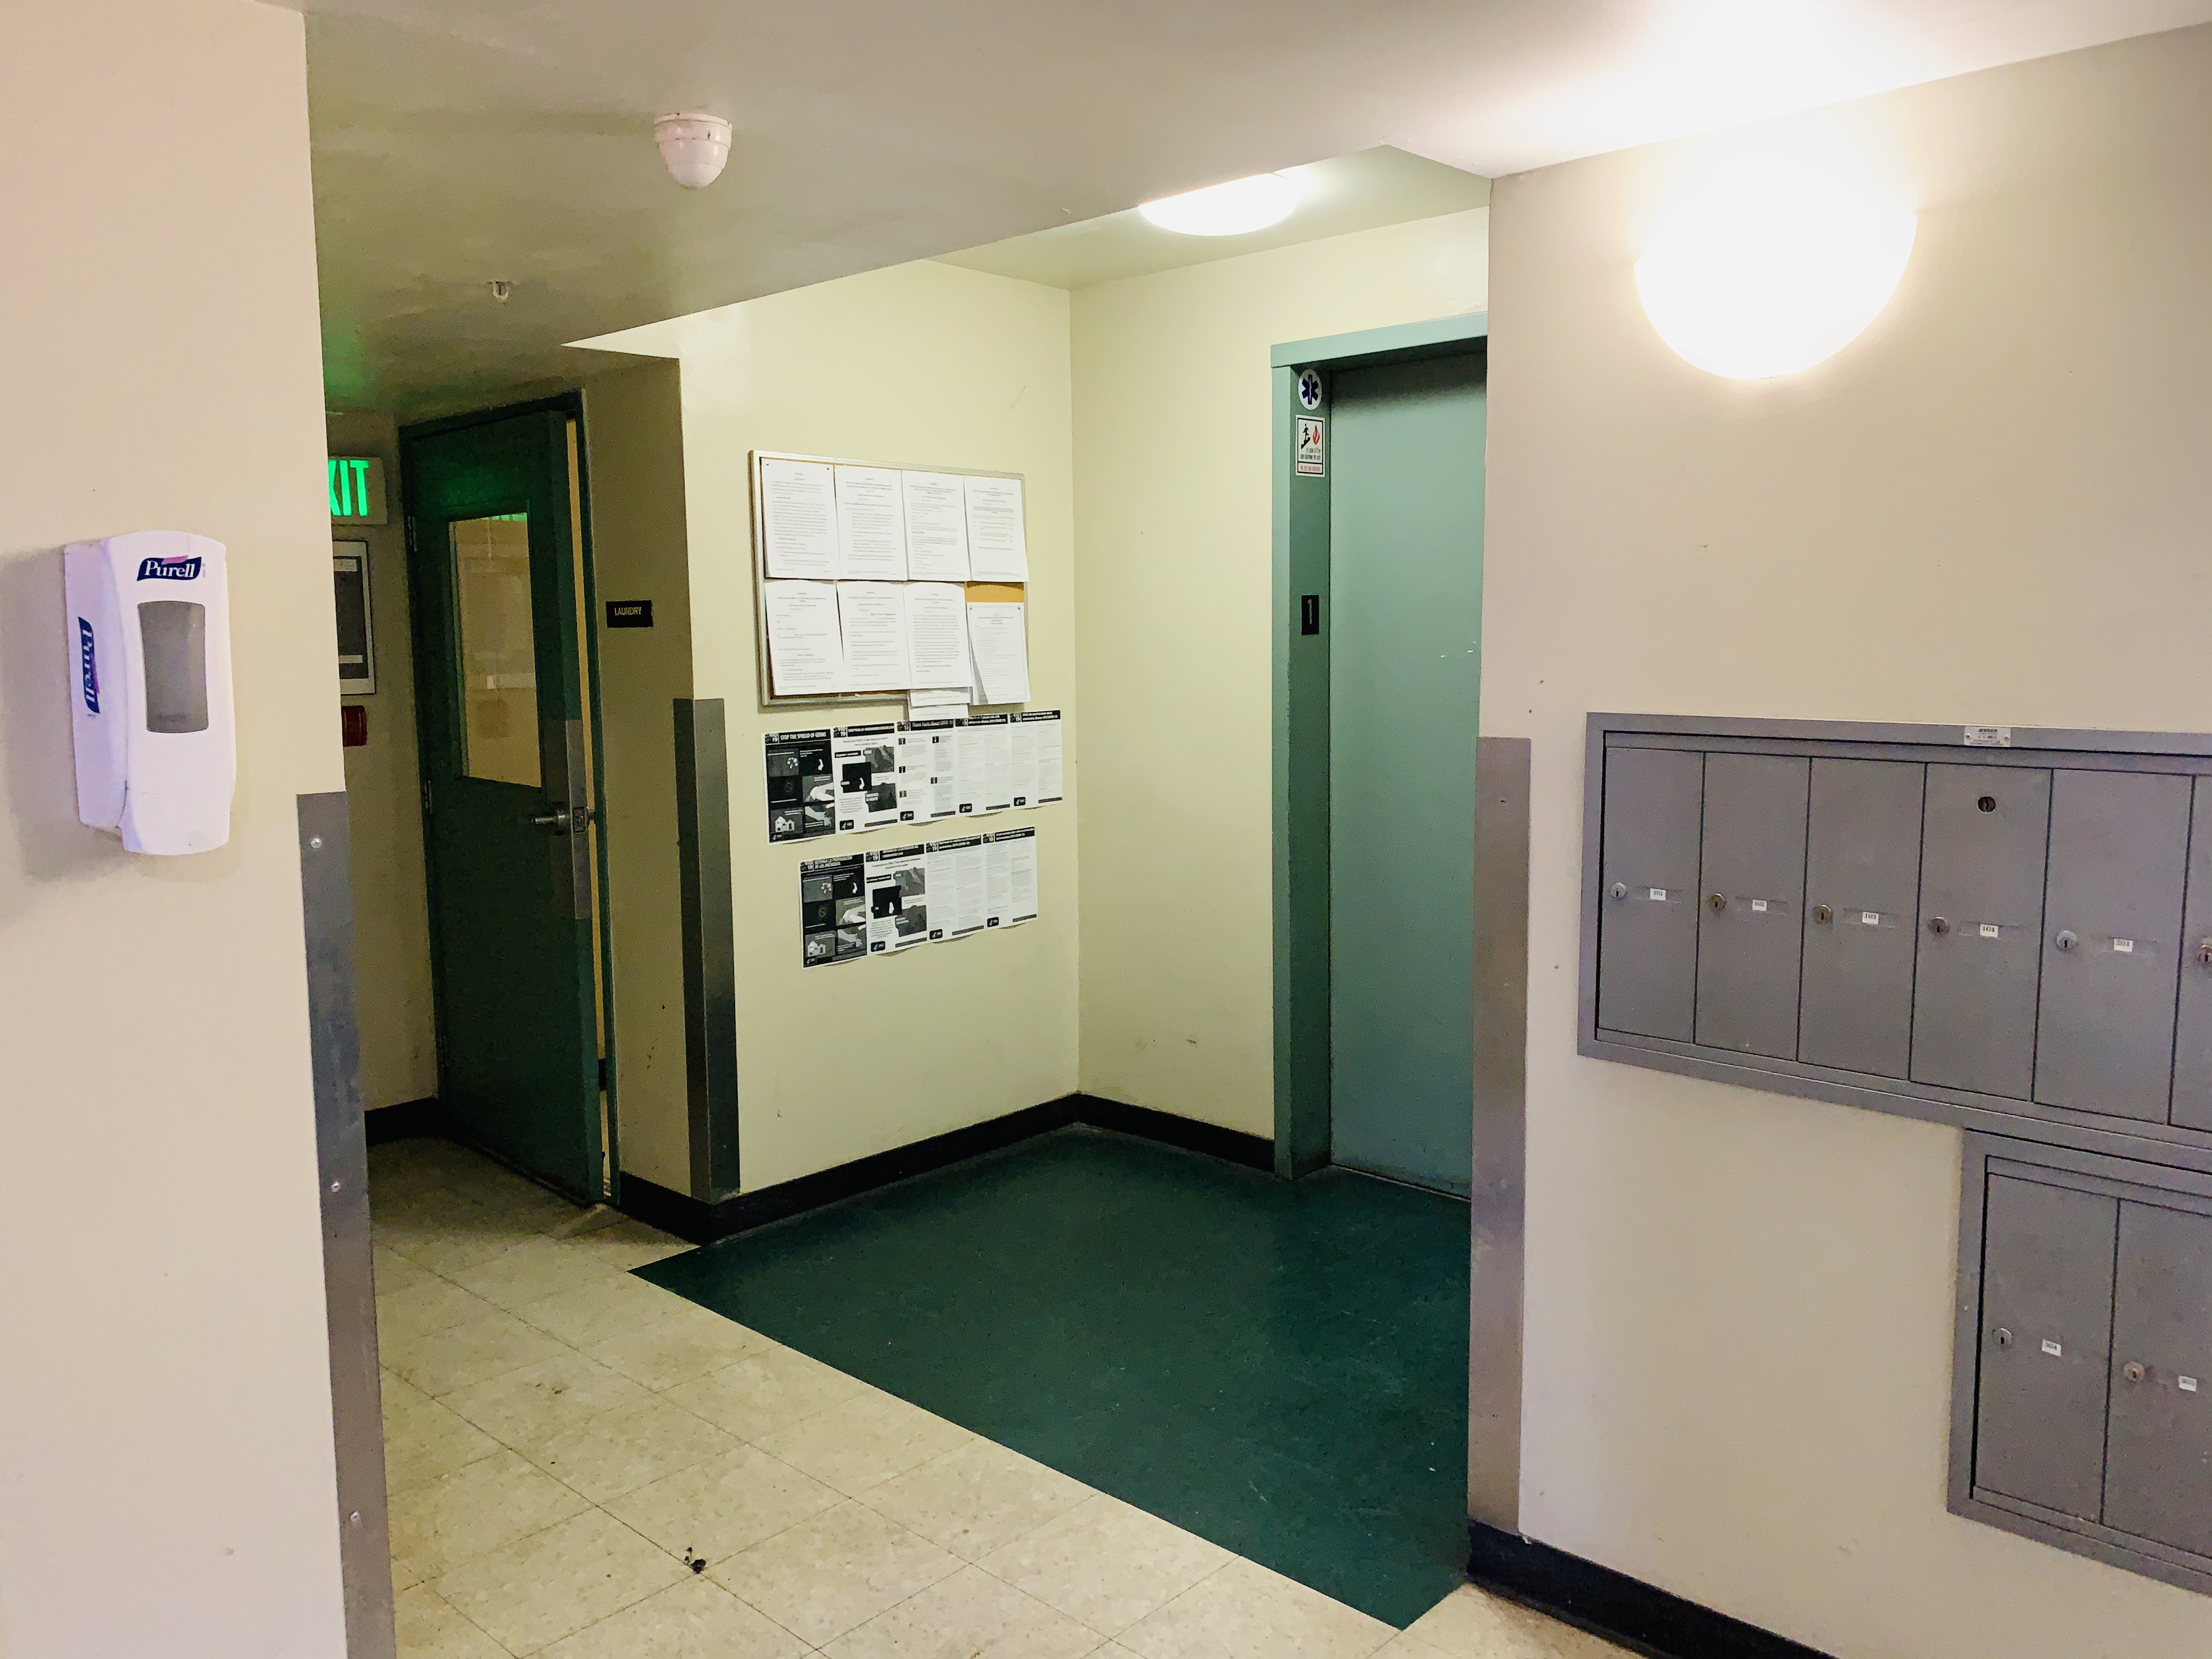 View of lobby, elevator, mailboxes on the right side, and a board with multiple flyers hanging on the left side wall.